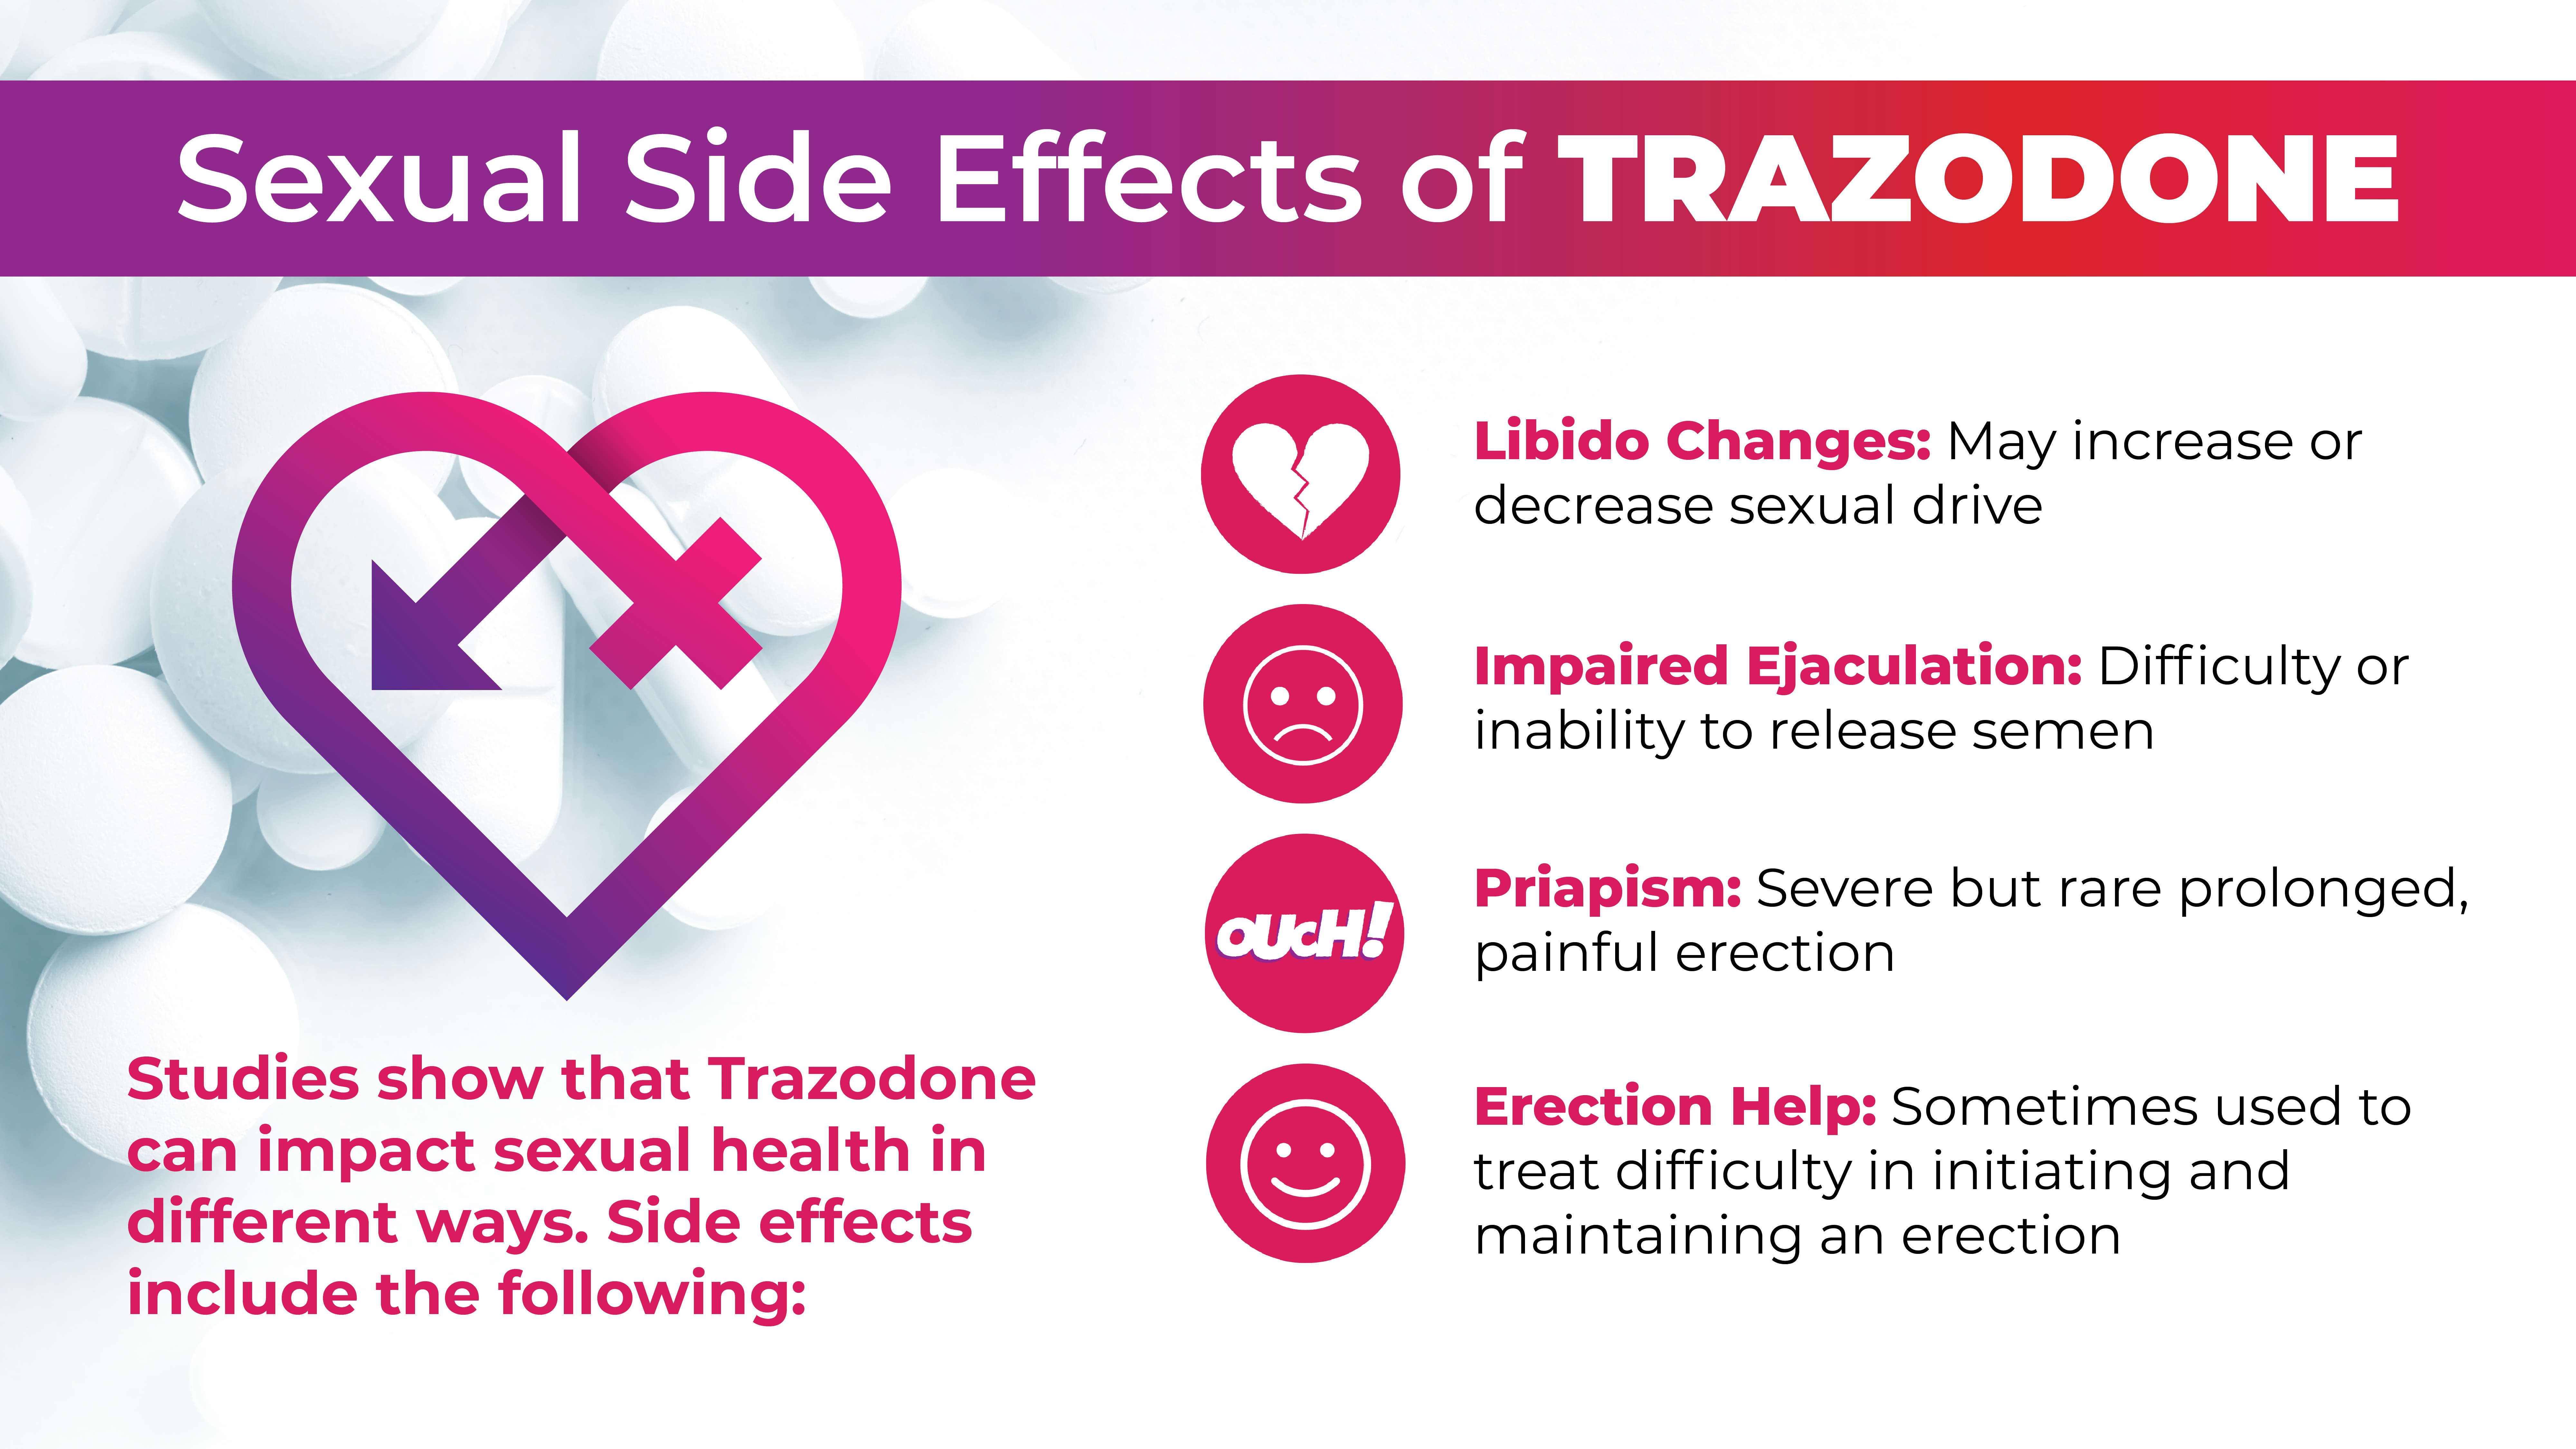 sexual side effects of trazodone infographic